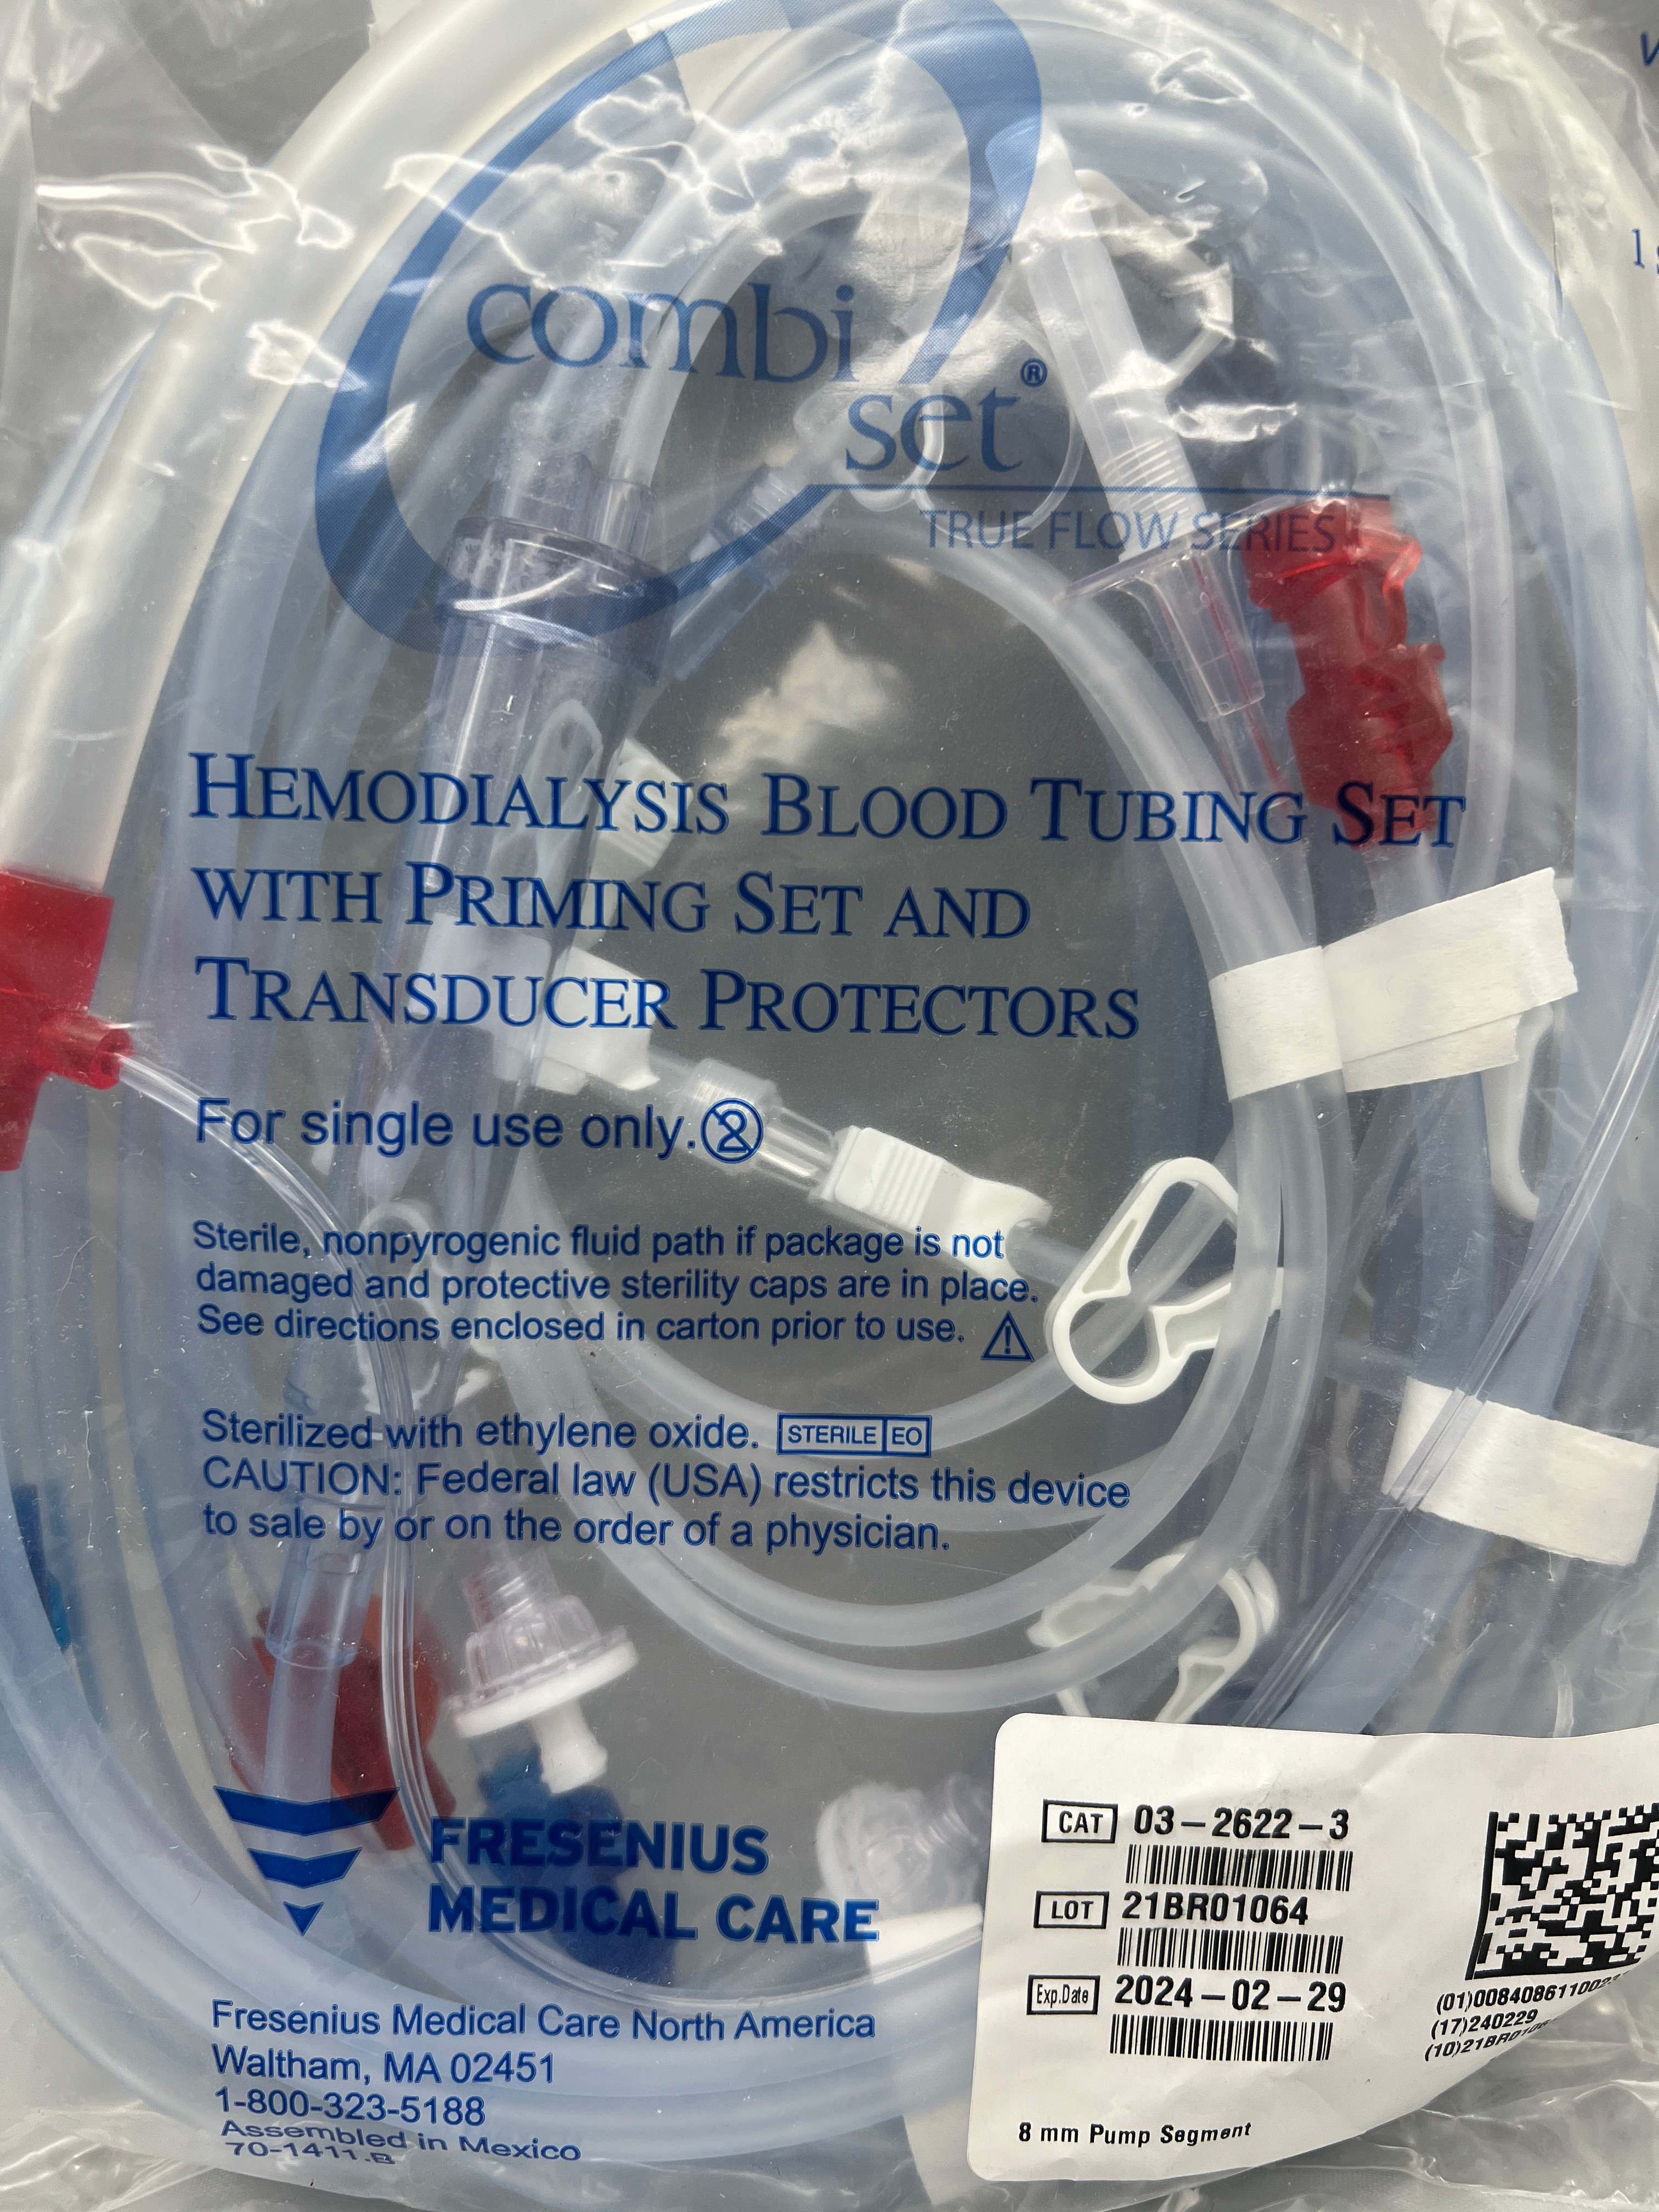 HEMODIALYSIS BLOOD TUBING SET WITH PRIMING SET AND TRANSDUCER PROTECTORS